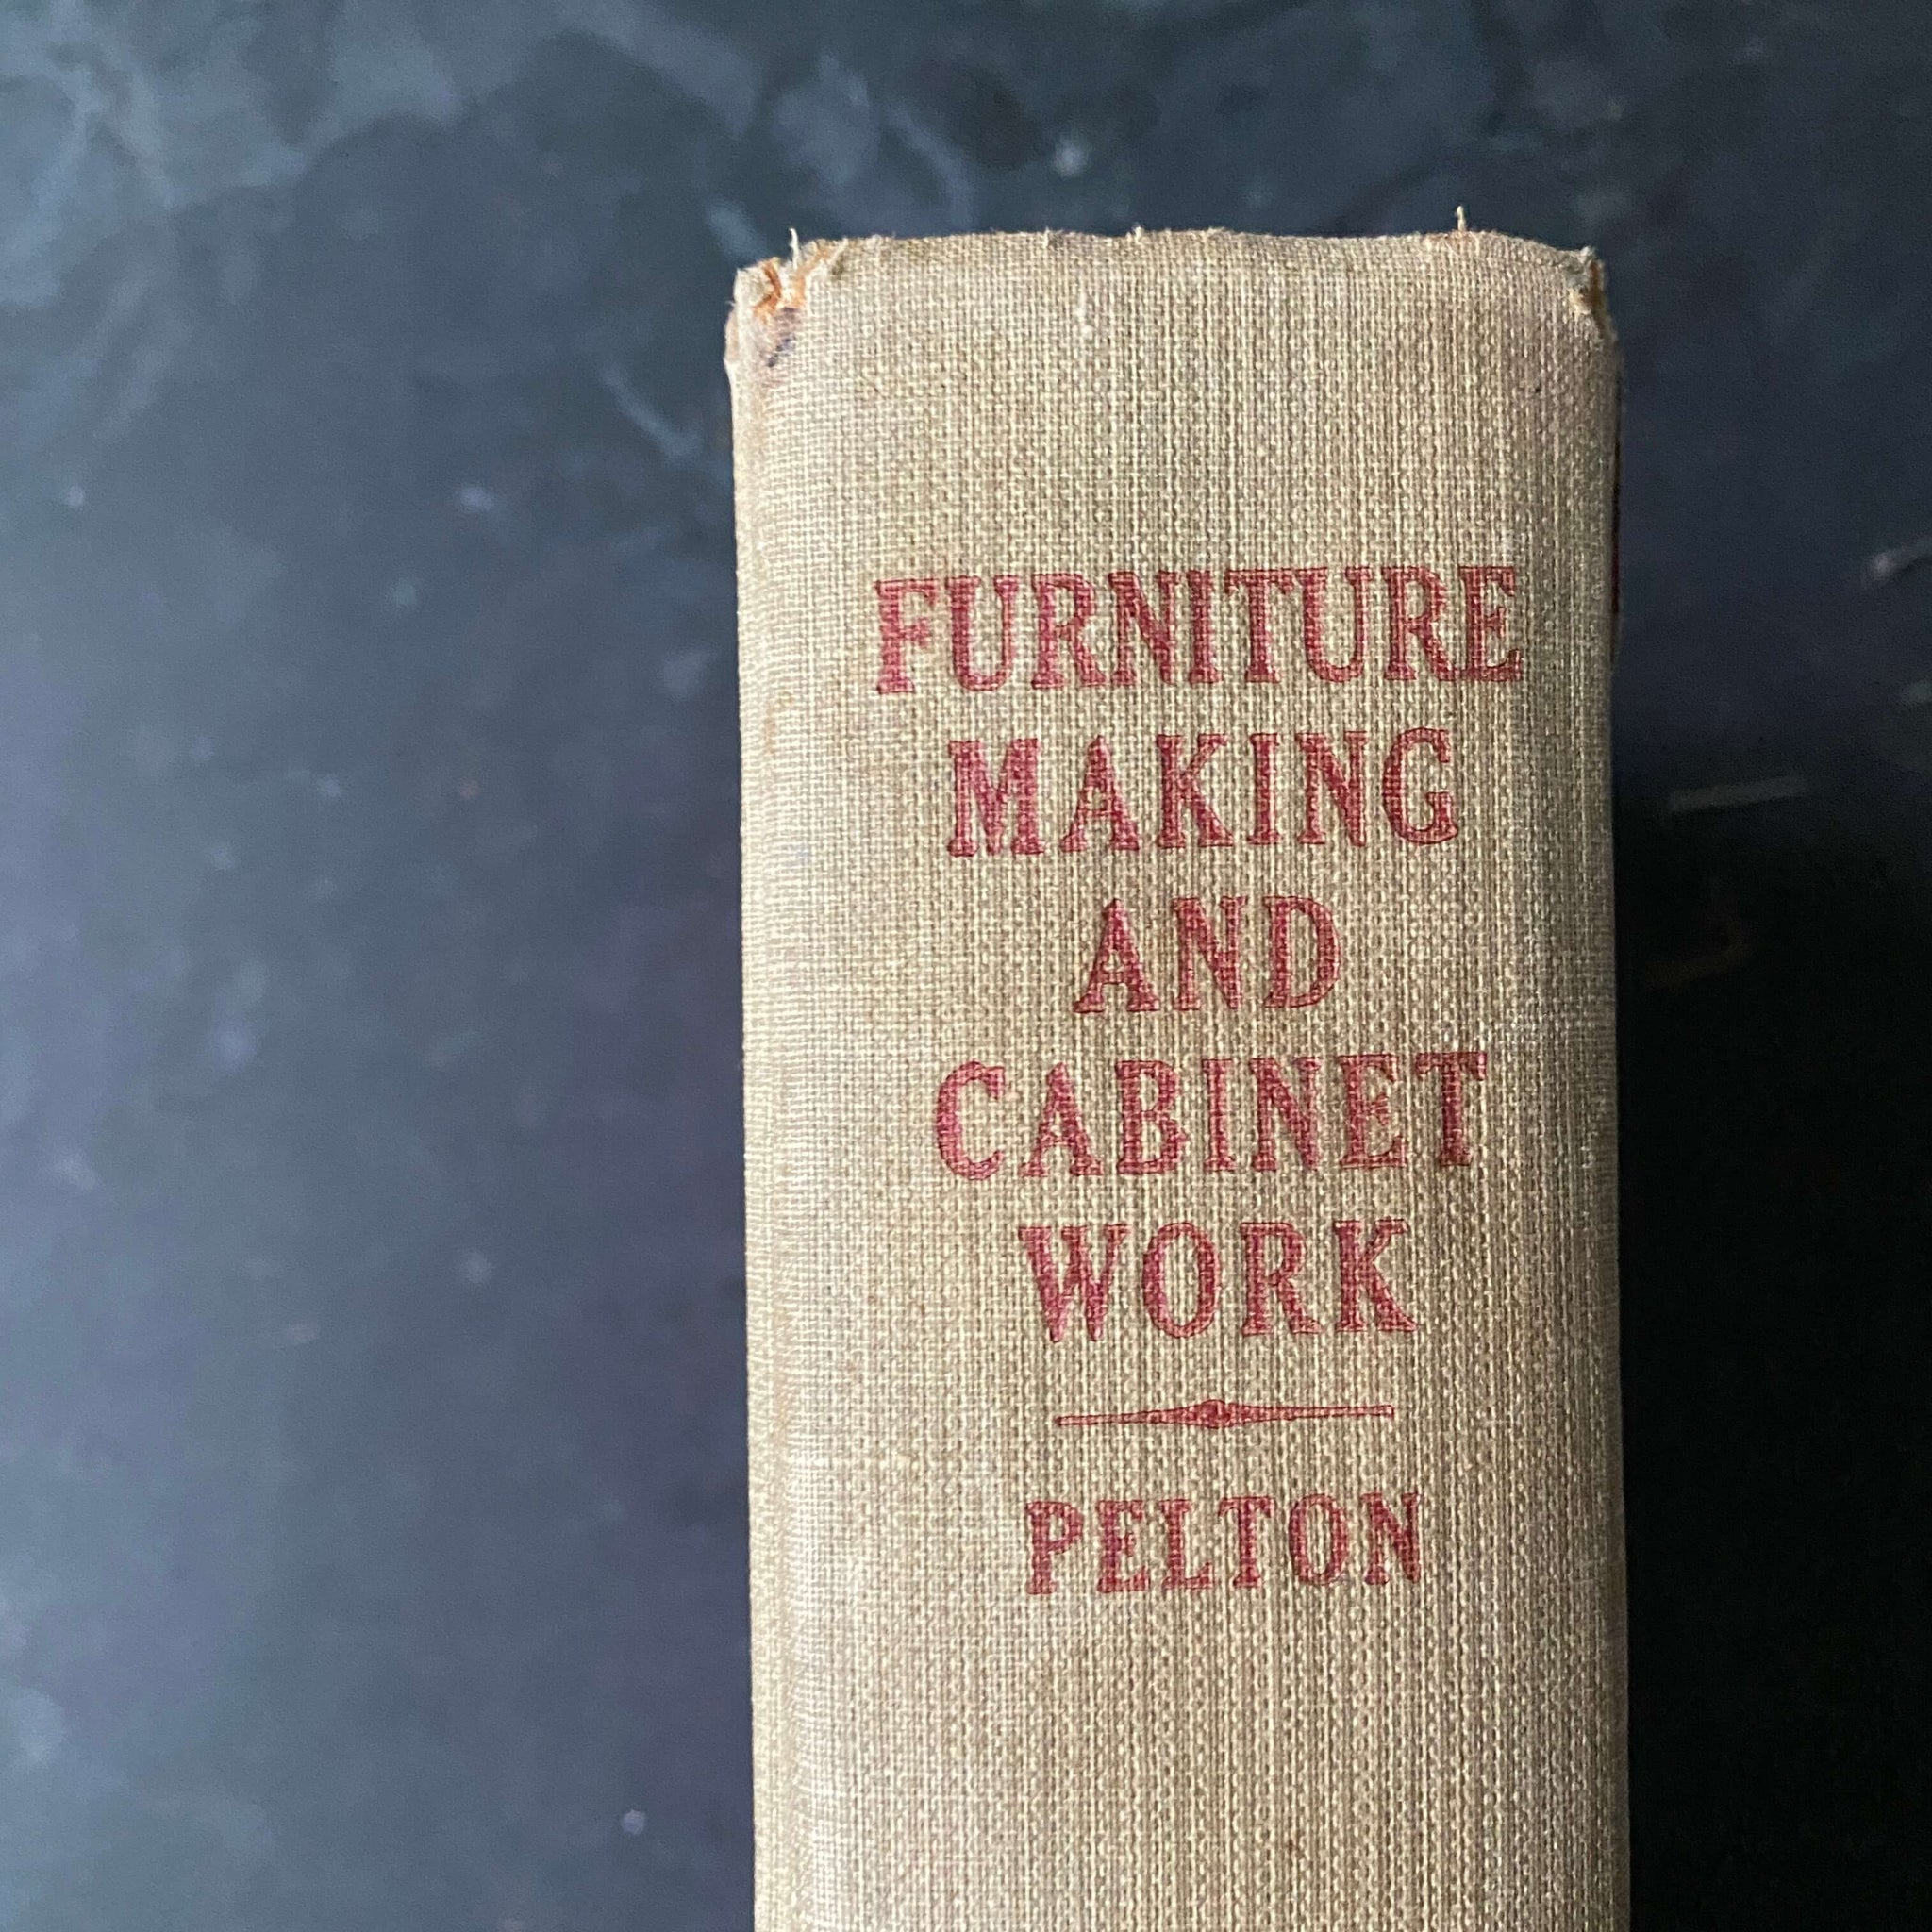 Furniture Making & Cabinet Work - 1949 Edition - BW Pelton Woodworking Book